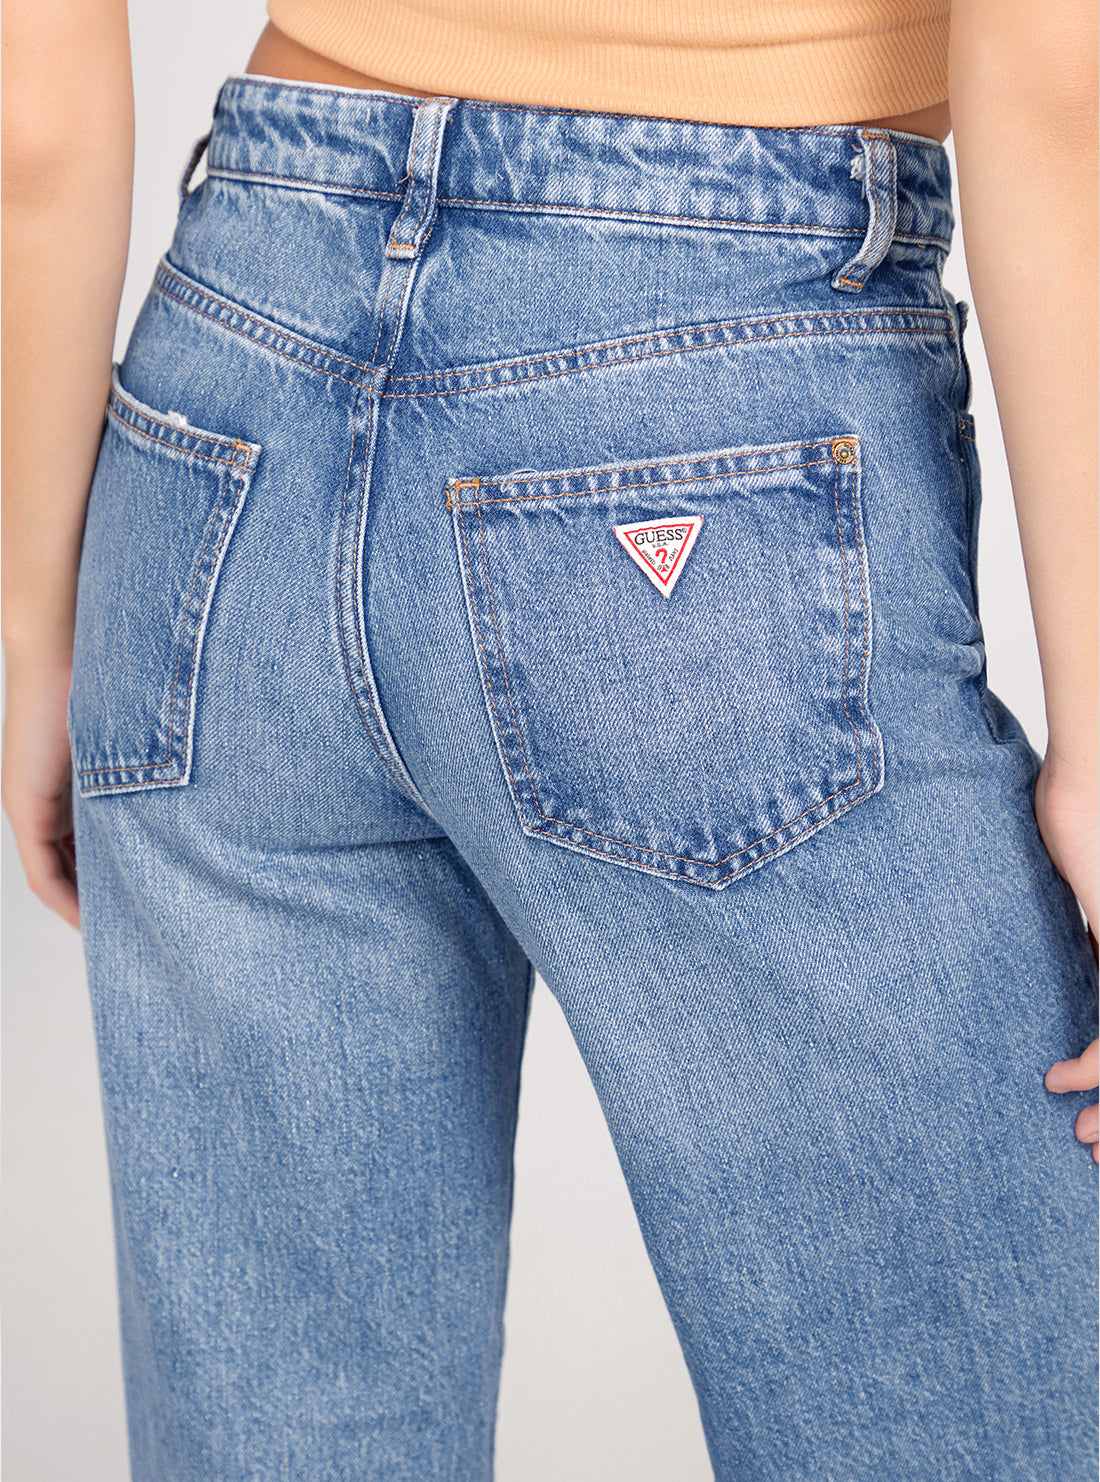 GUESS Mid-Rise Relaxed Straight Leg Jeans In Light Wash detail view